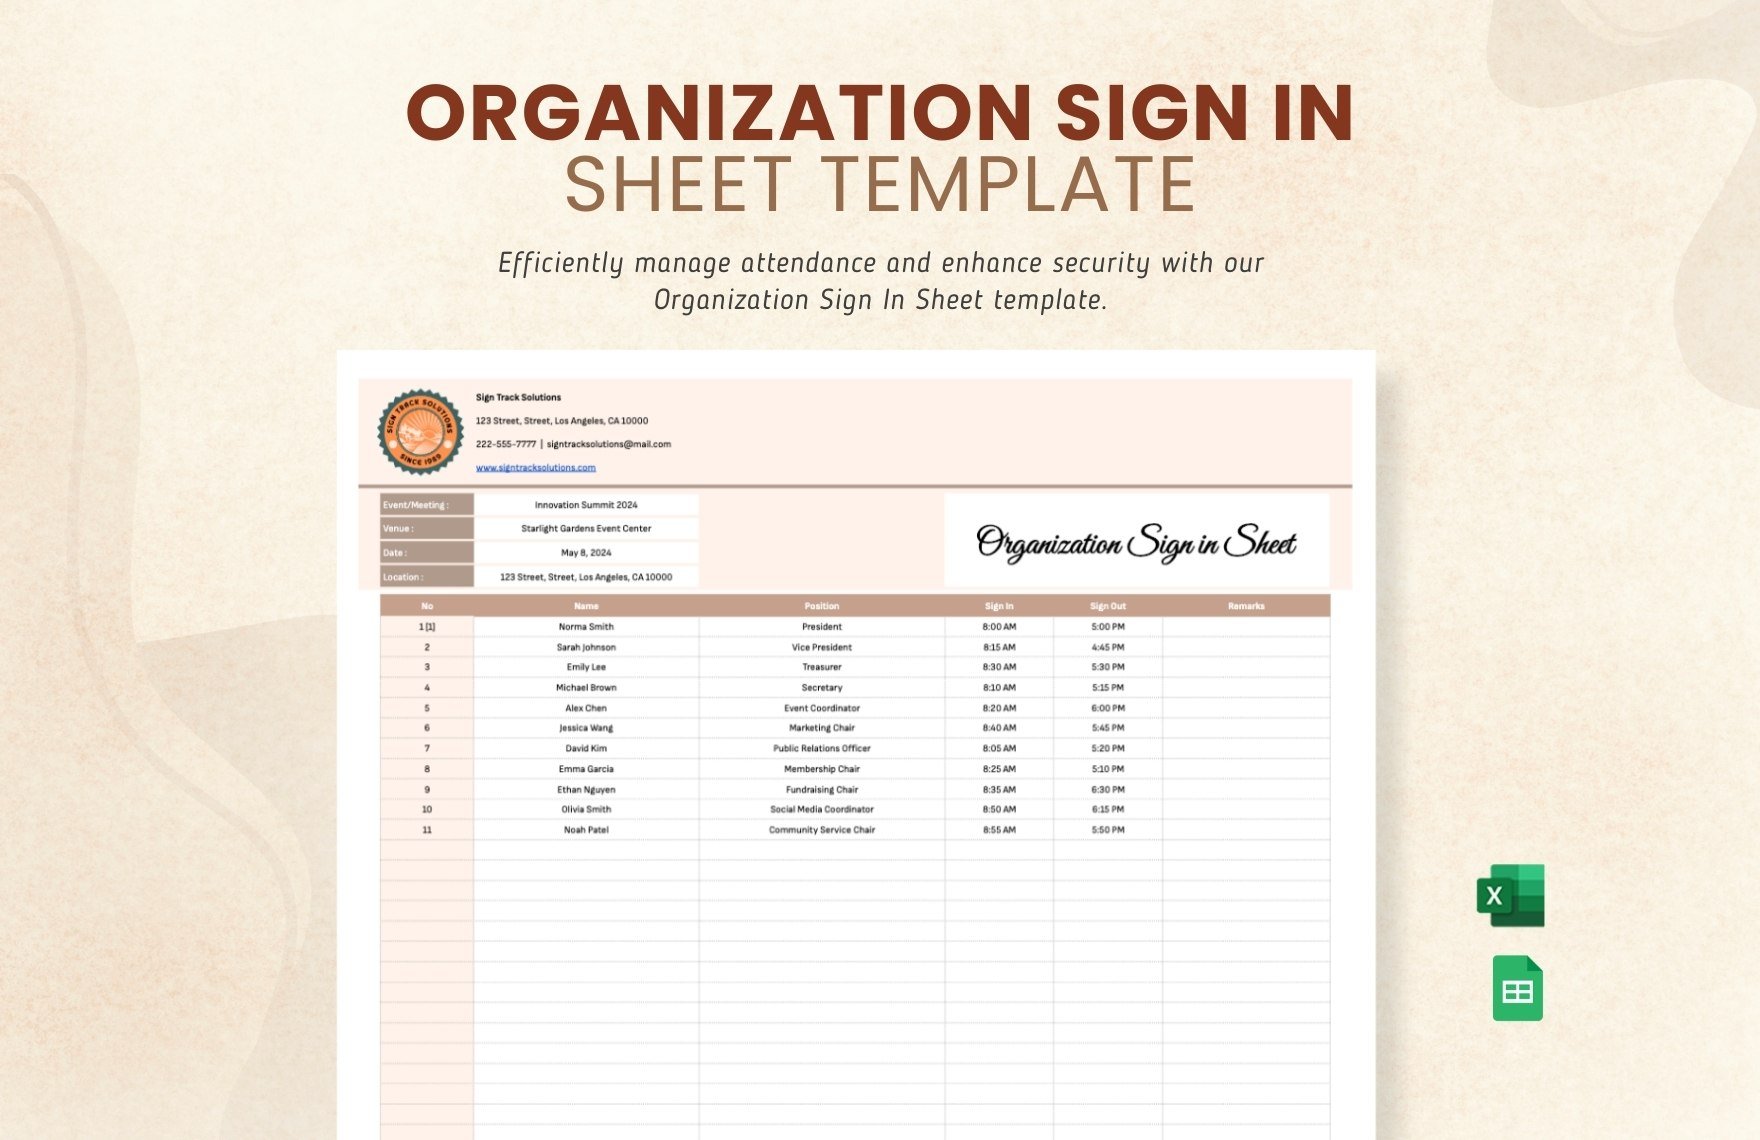 Organization Sign in Sheet Template in Excel, Google Sheets